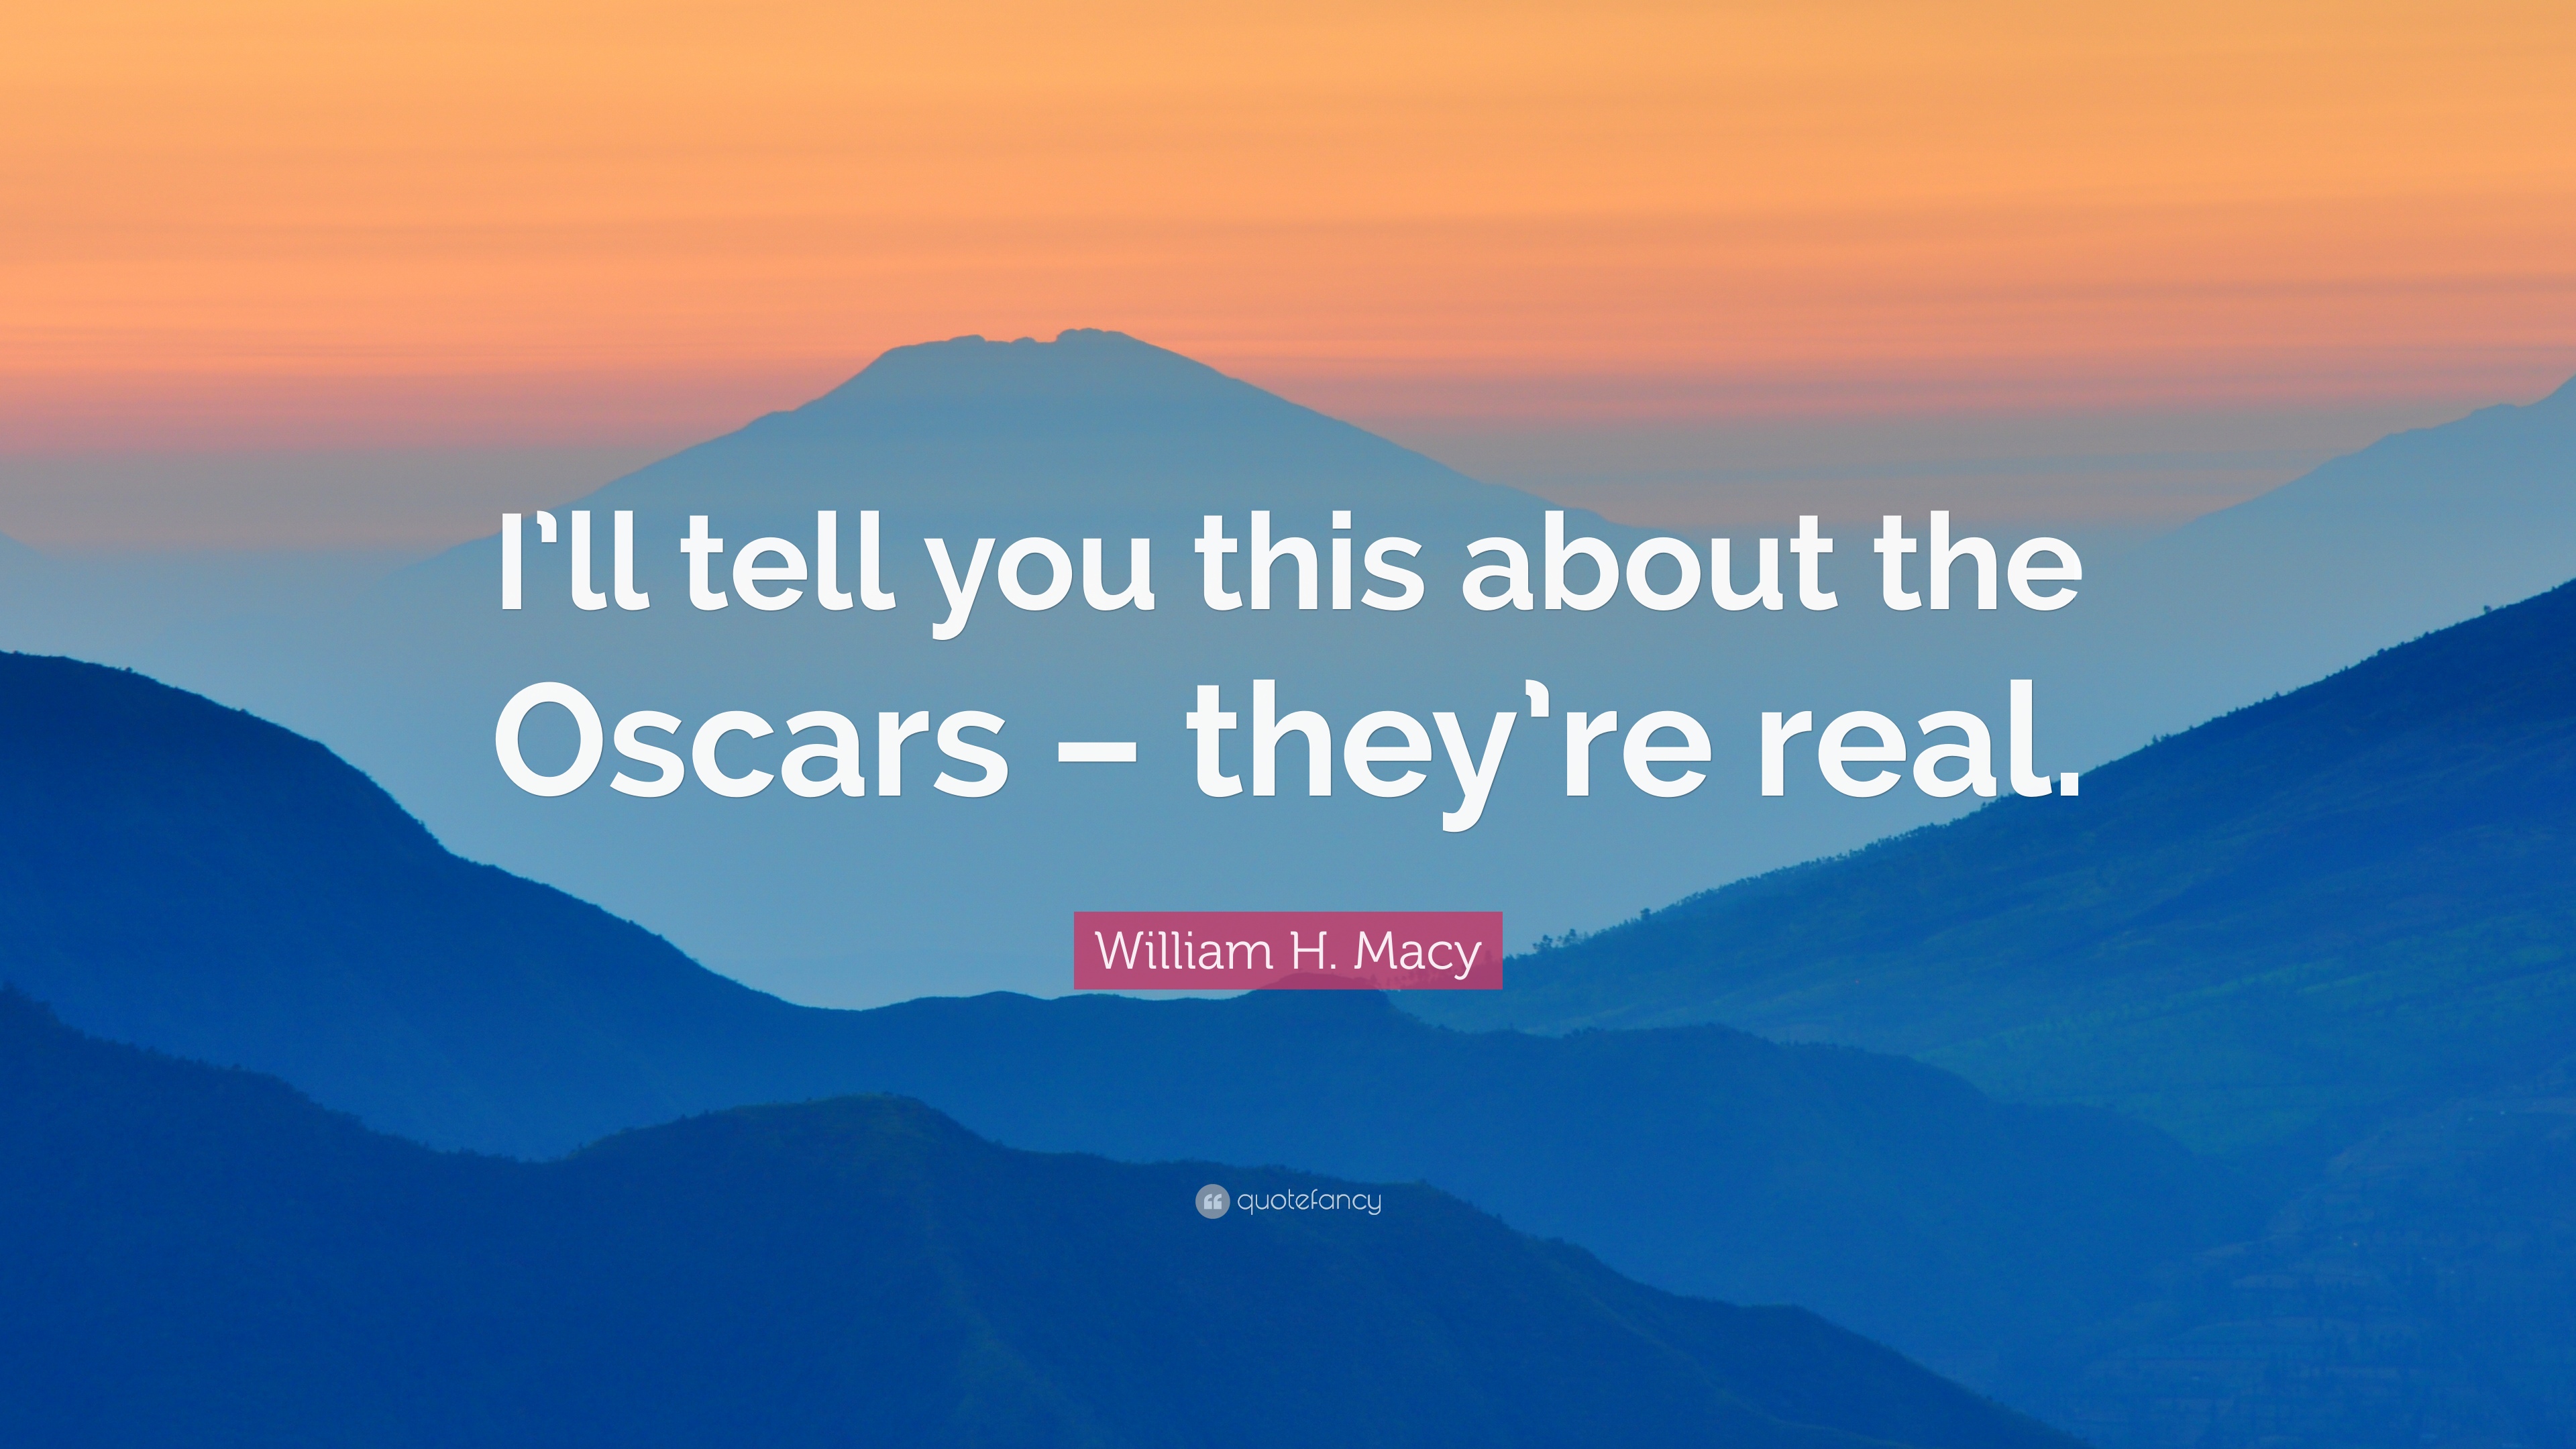 William H. Macy Quote: “I'll tell you this about the Oscars